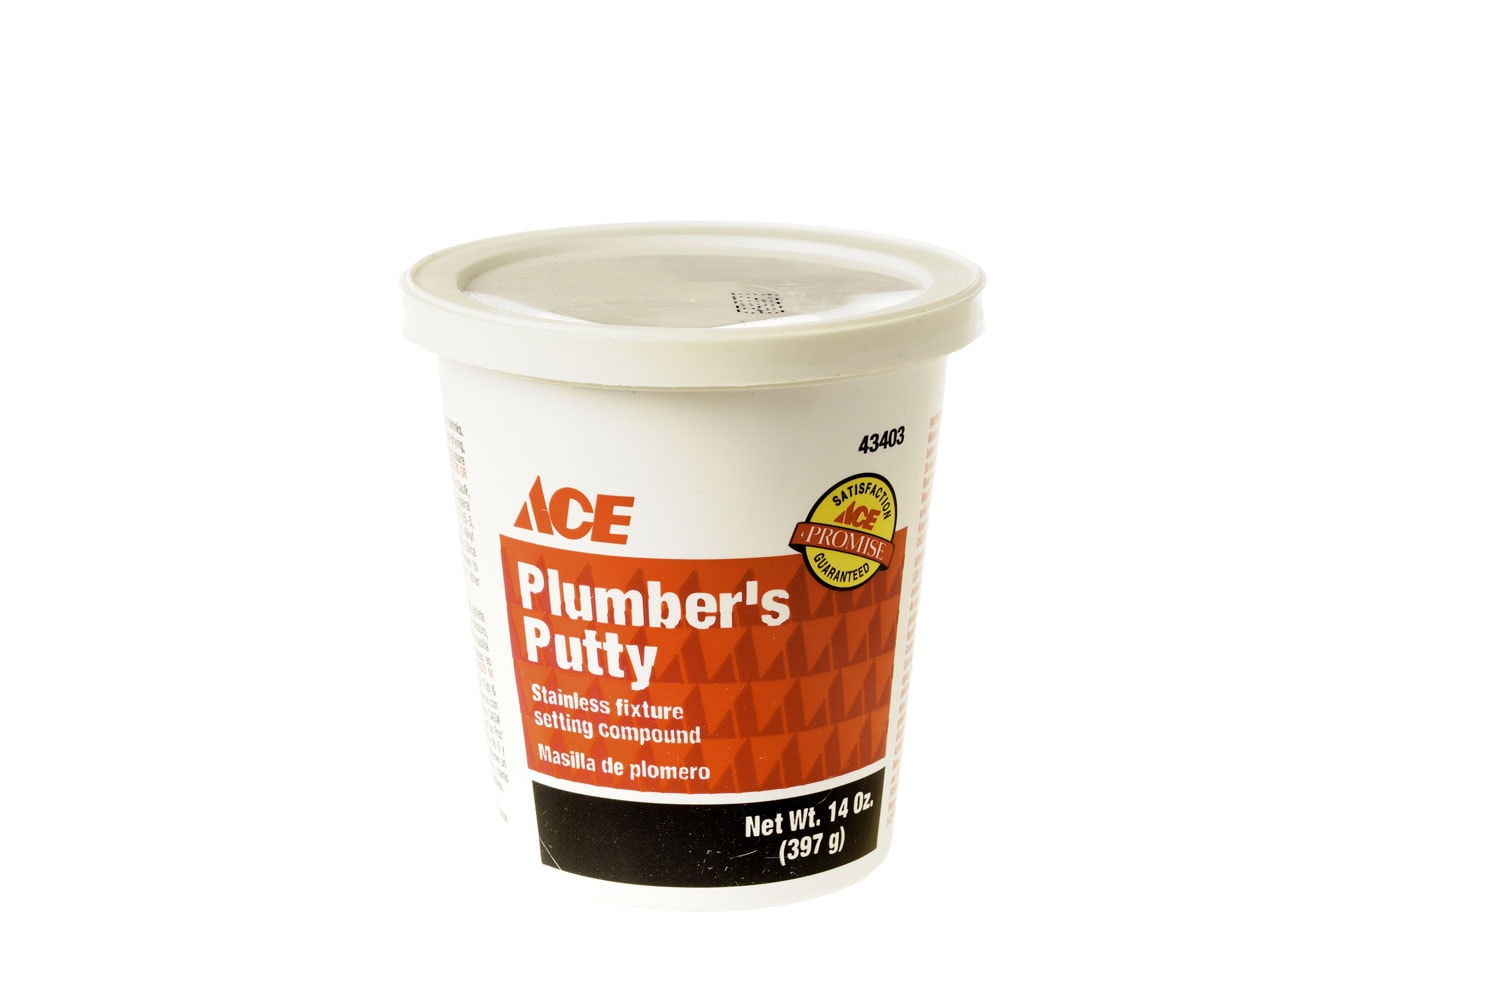 14oz container of Plumbers Putty, formulated for stainless fixtures, ACE Hardware stores brand